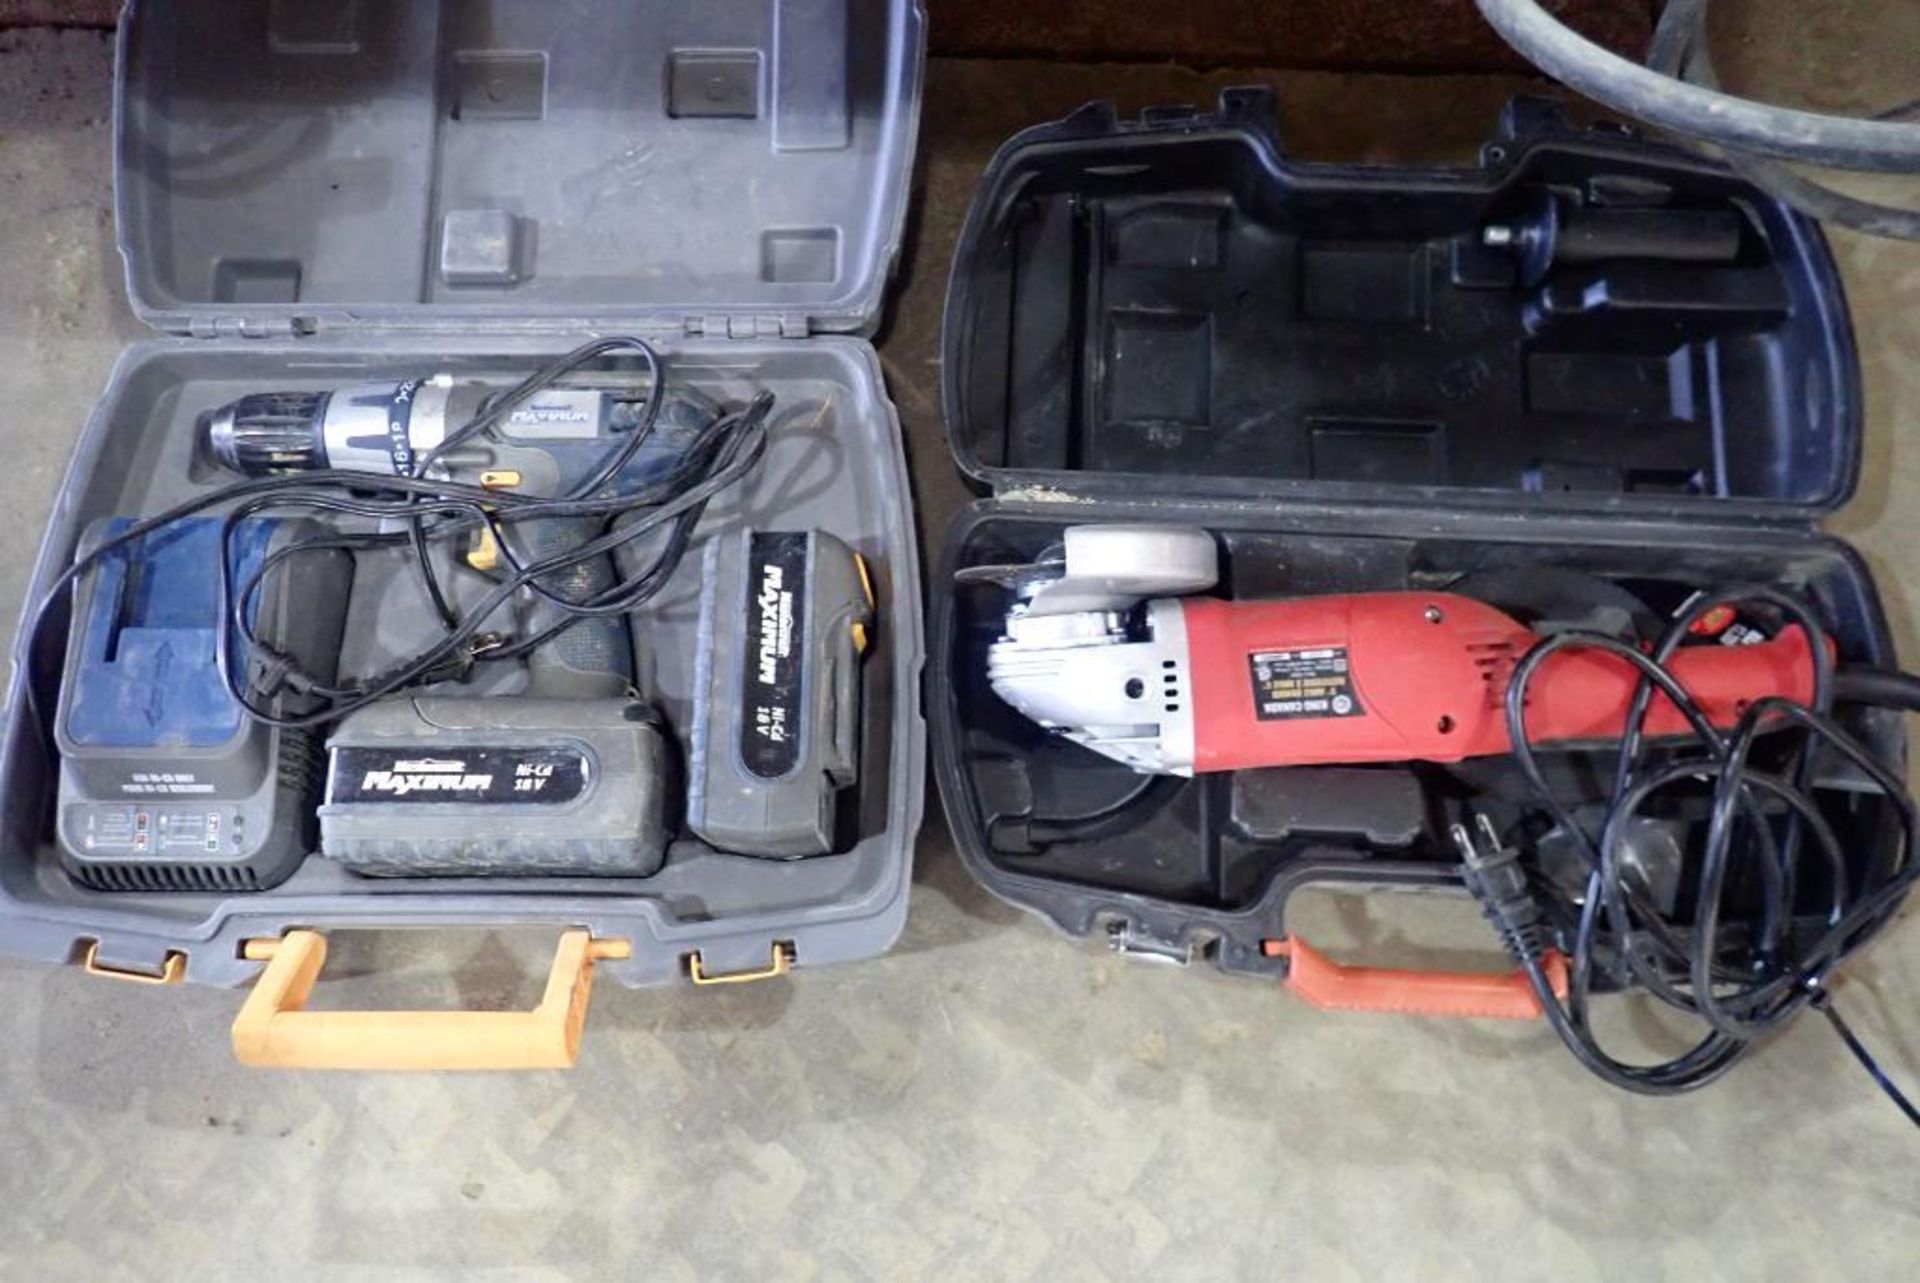 Lot of Mastercraft 18V Cordless Drill w/ 2 Batteries and Charger and King Angle Grinder.